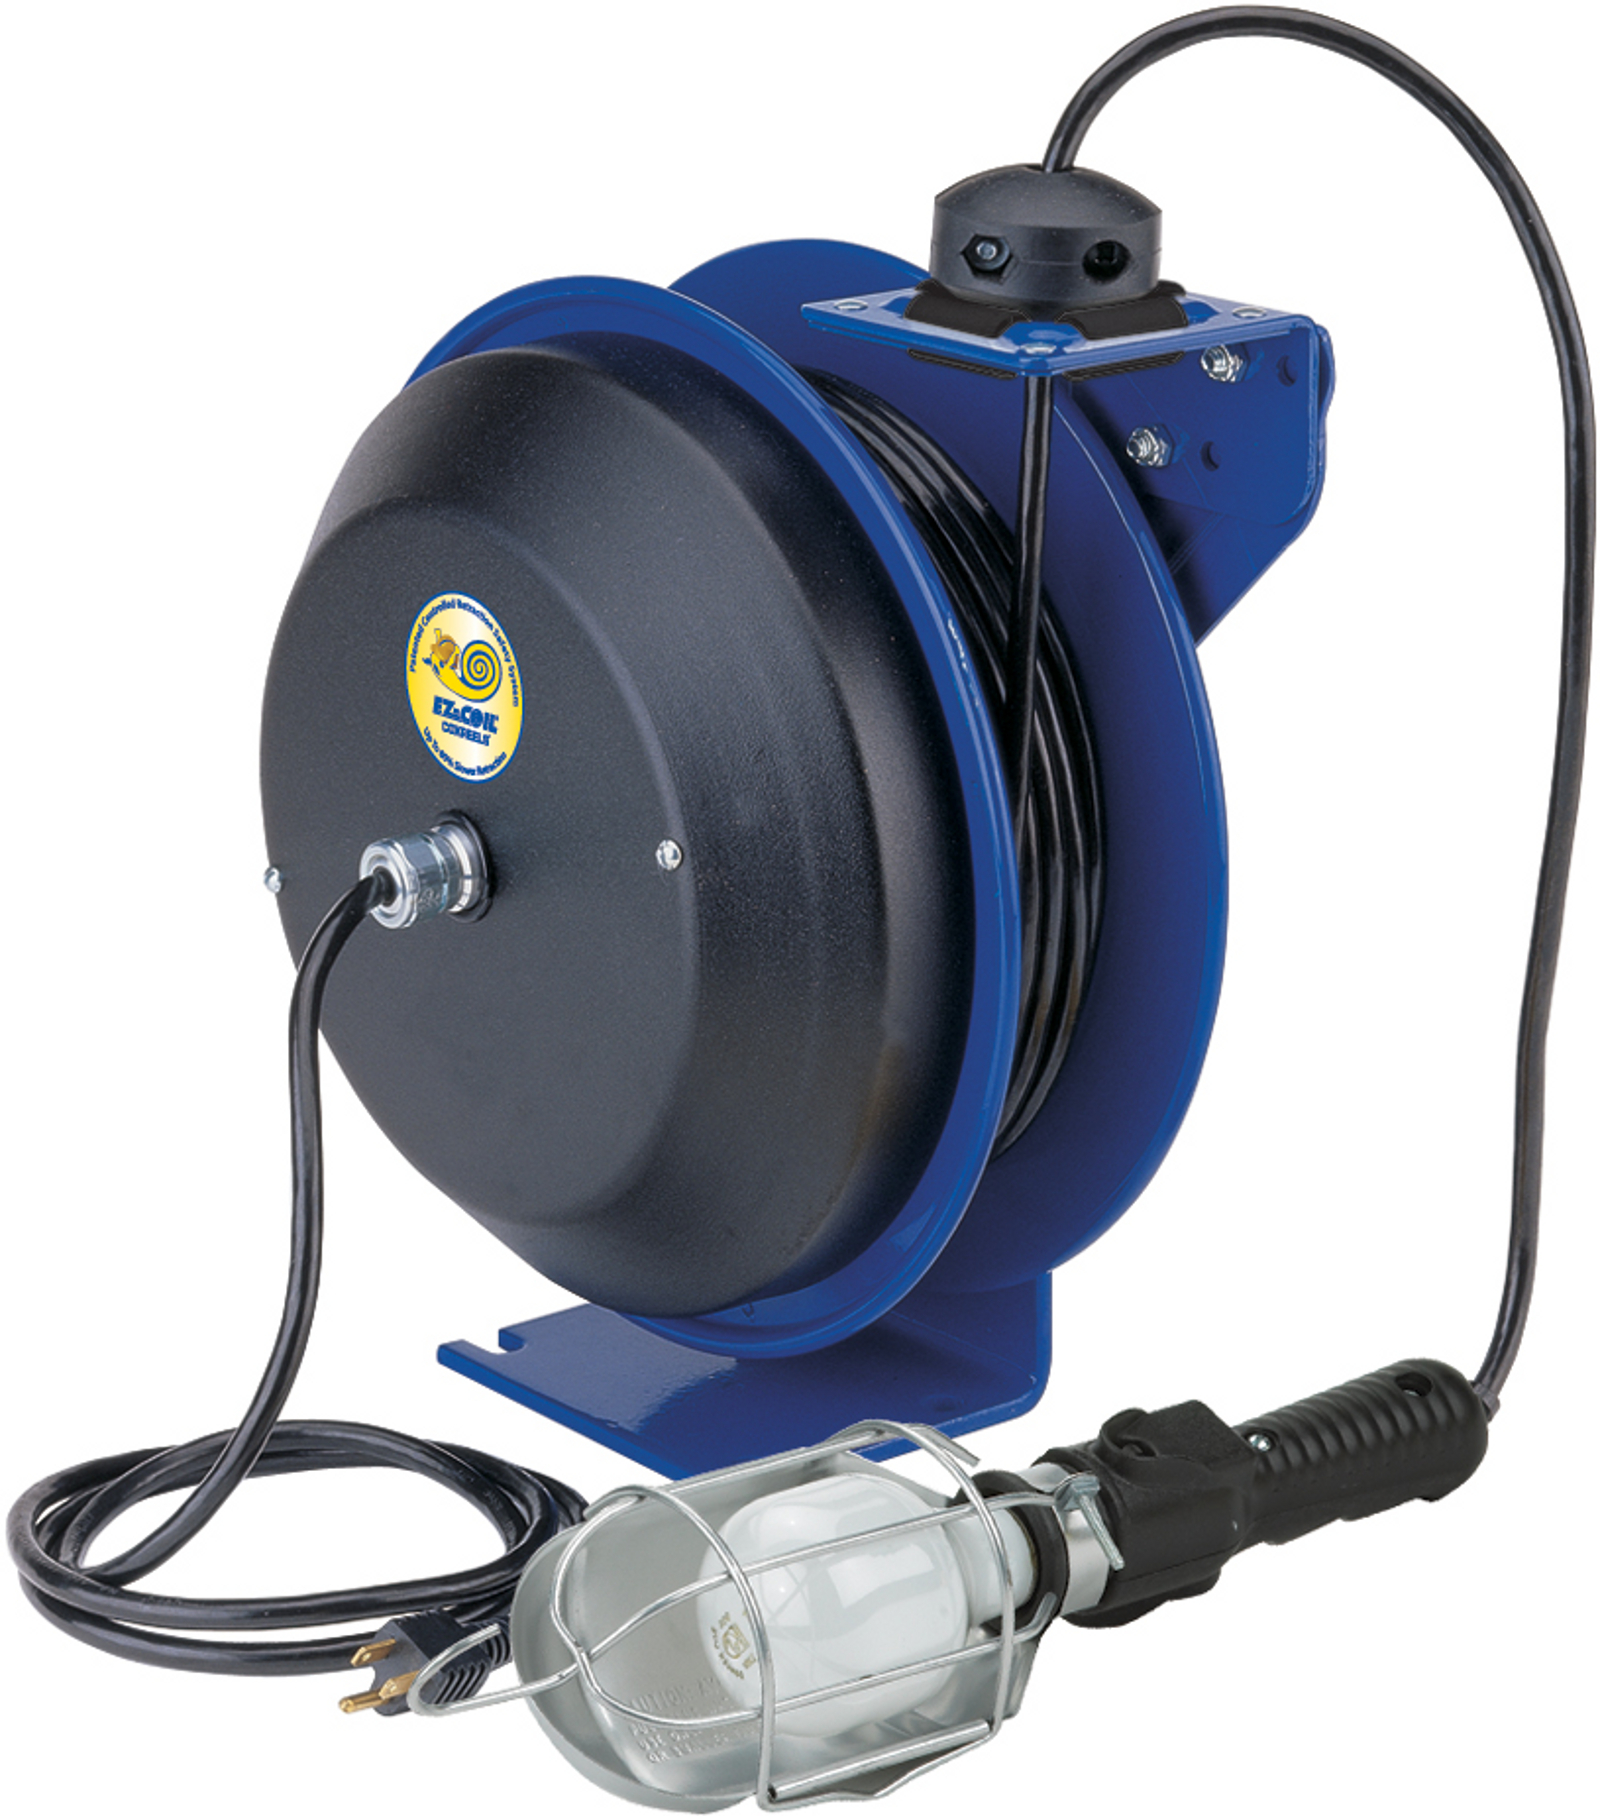 EZ-Coil Safety Series Sring Power Cord Reel with Light